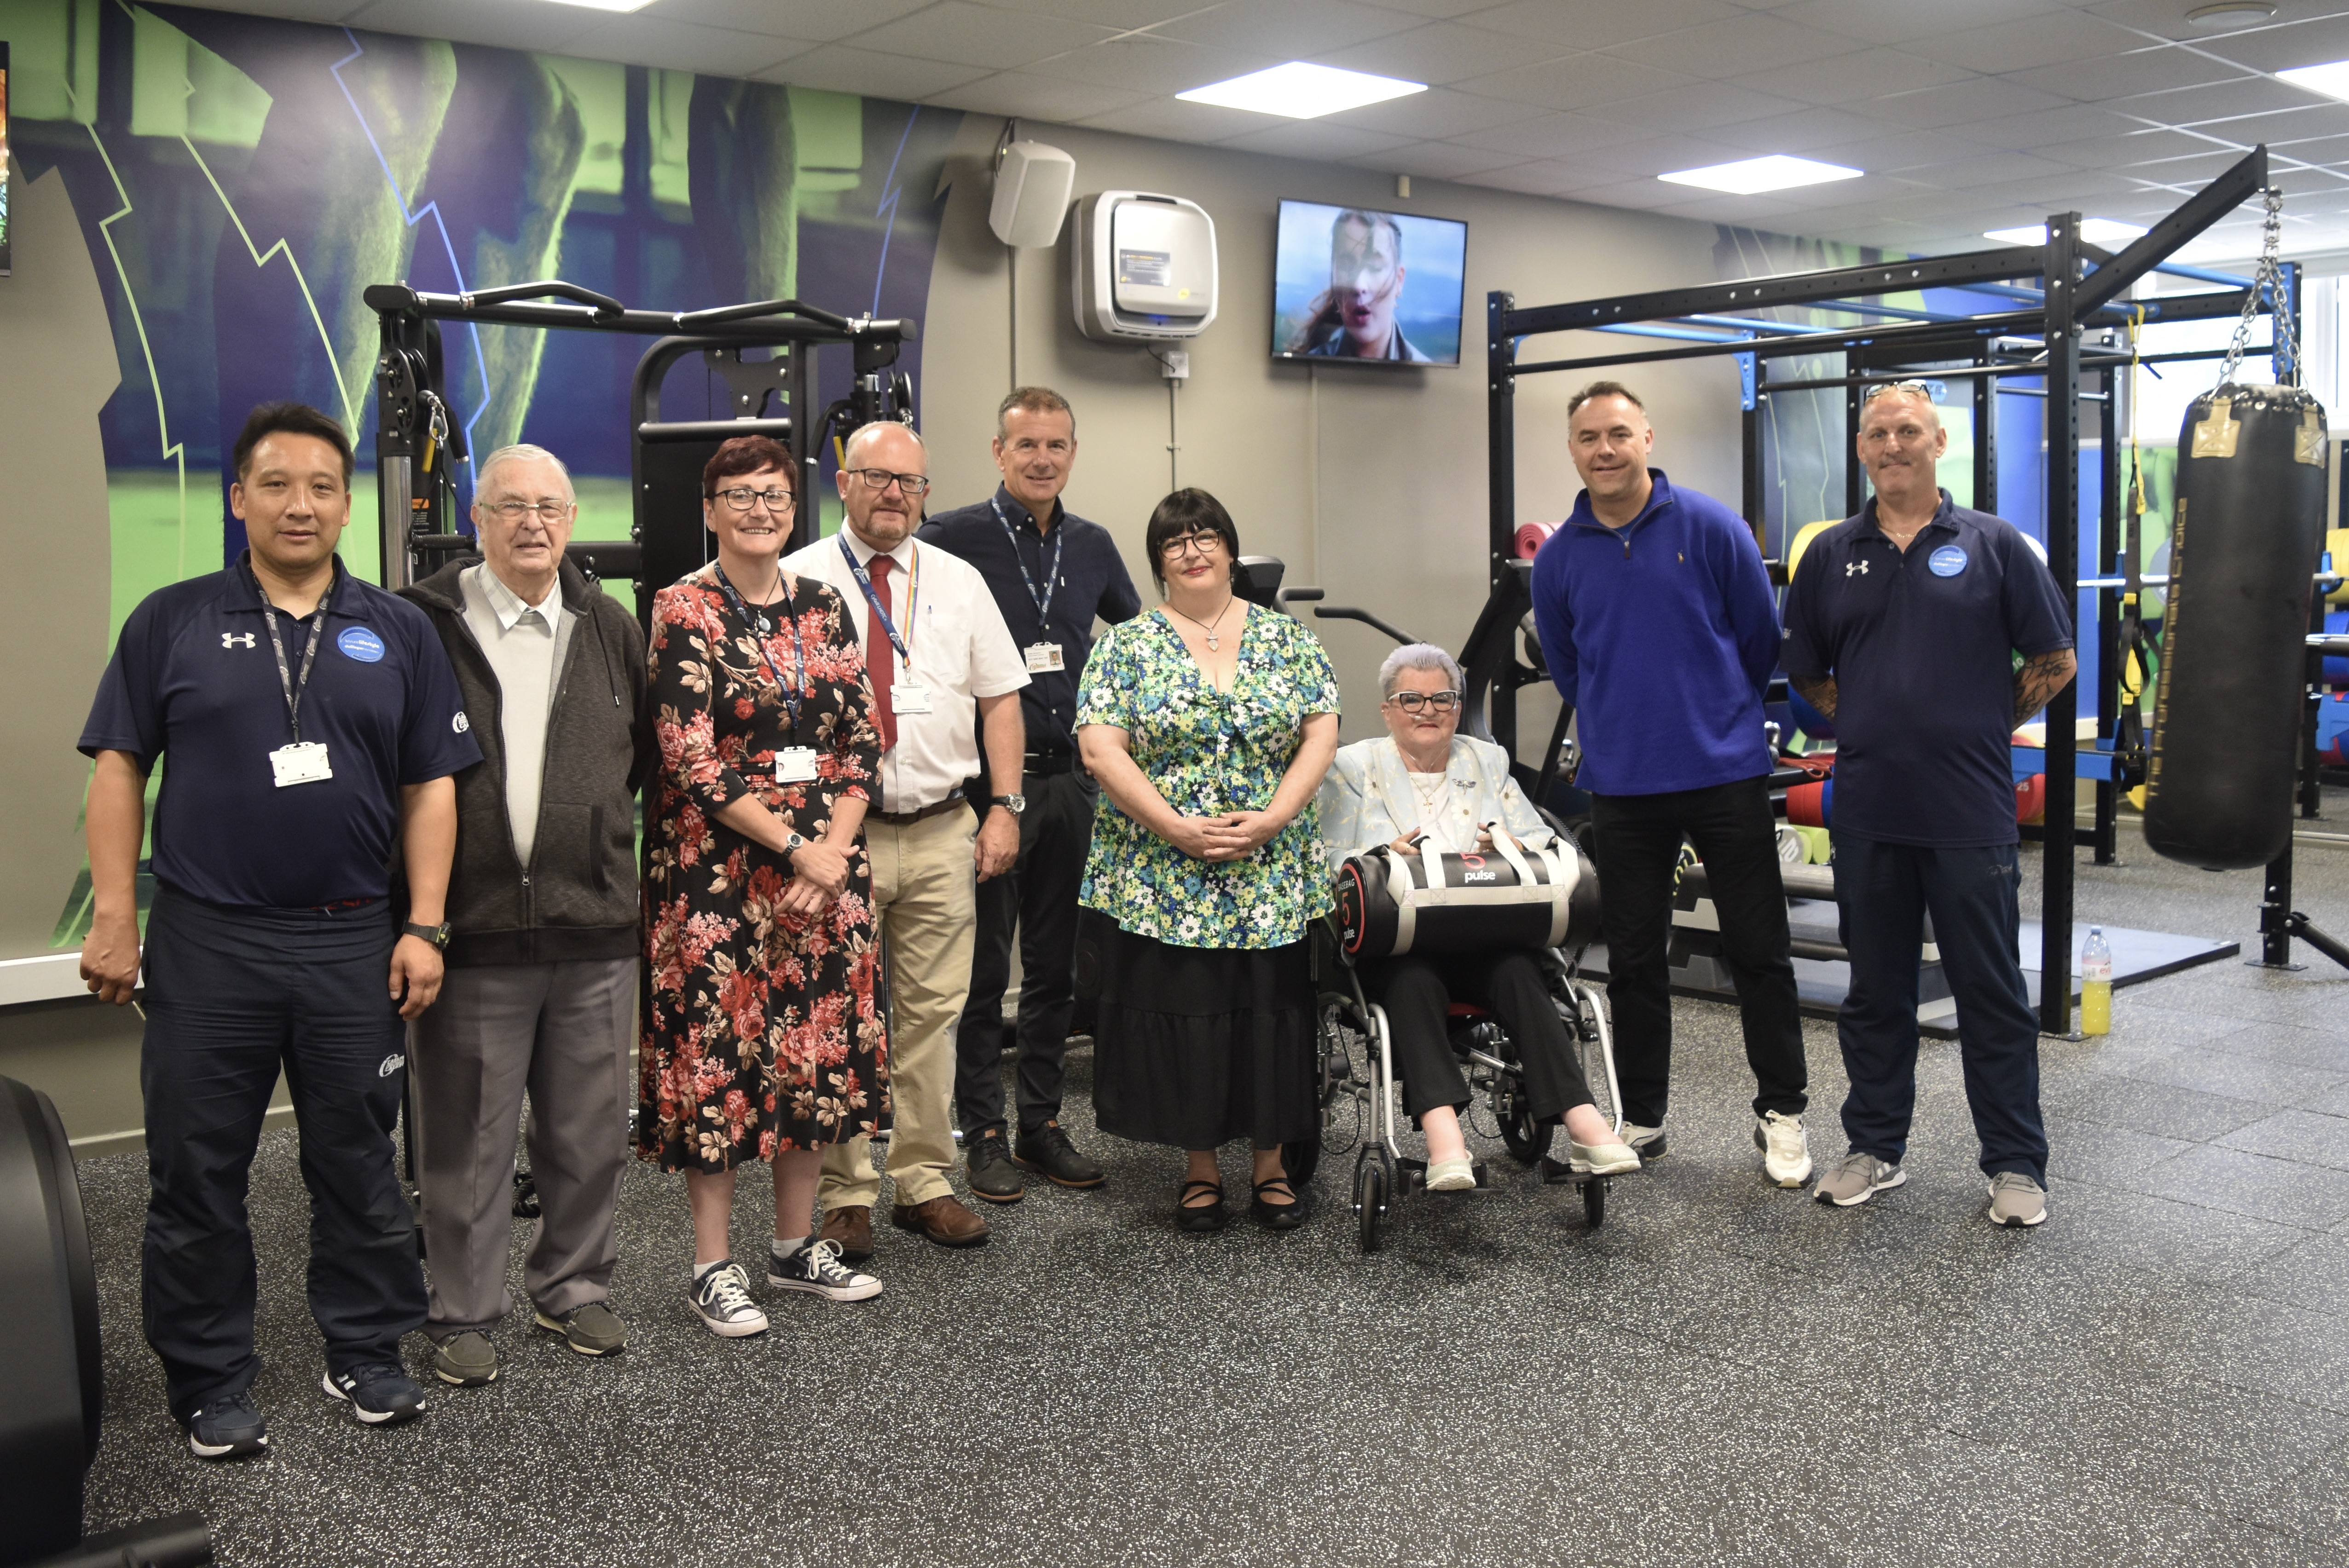 New Fitness Suite at Heolddu Leisure Centre